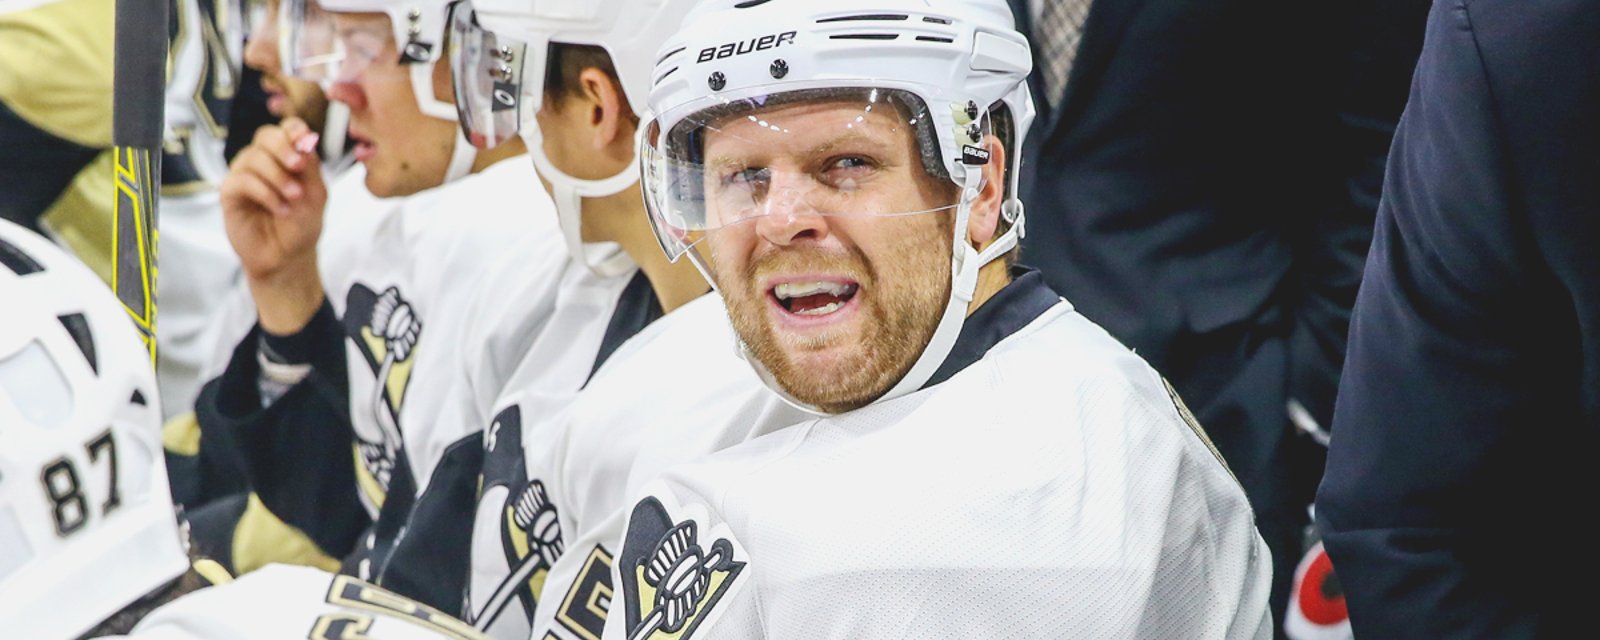 GOTTA SEE IT: Phil “Hot Dog” Kessel immortalized in ink